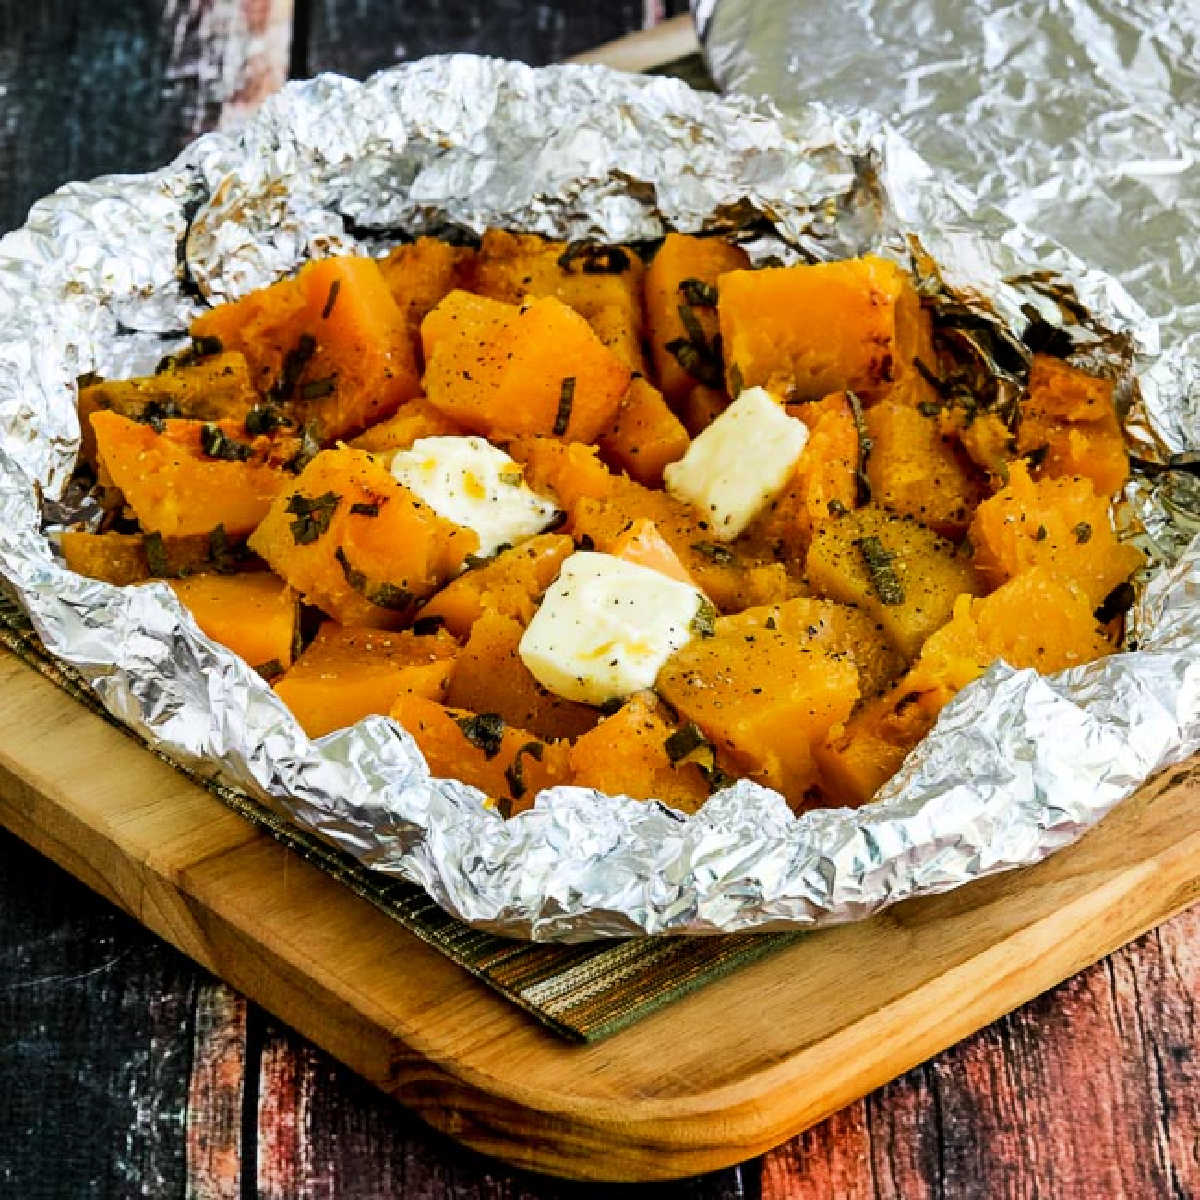 Butternut Squash with Sage, cooked in foil on the grill or in the oven.